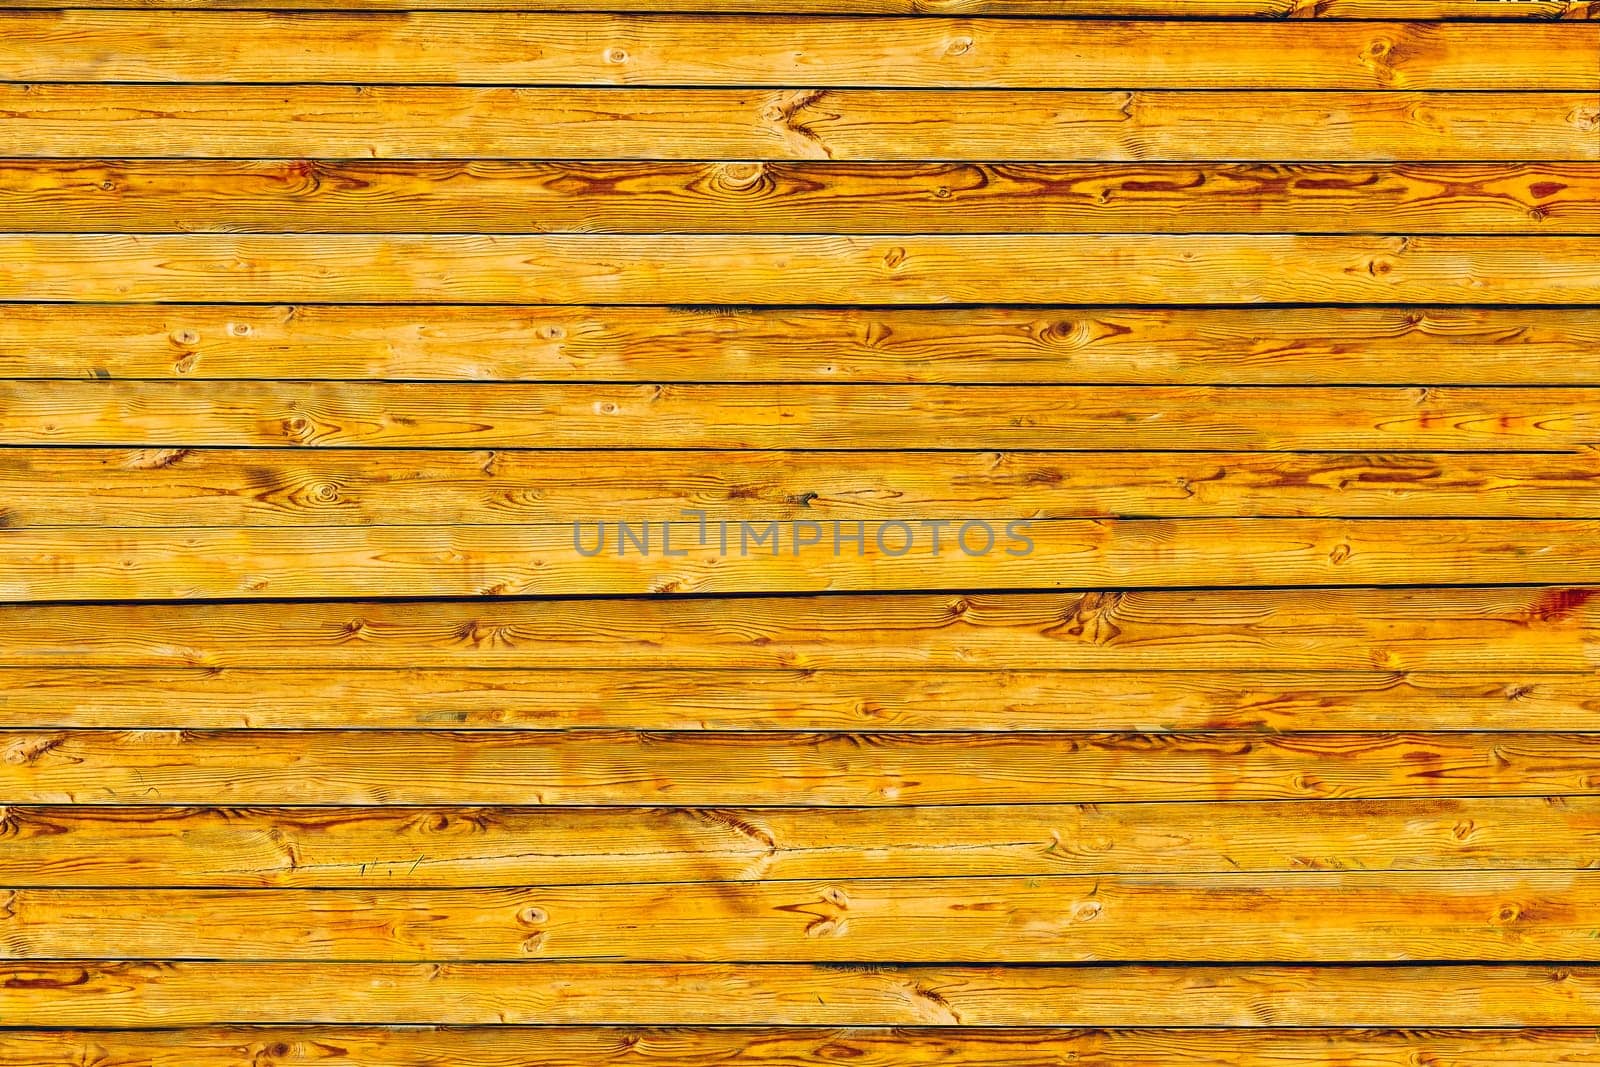 Wooden fence made of thin boards arranged horizontally by jovani68